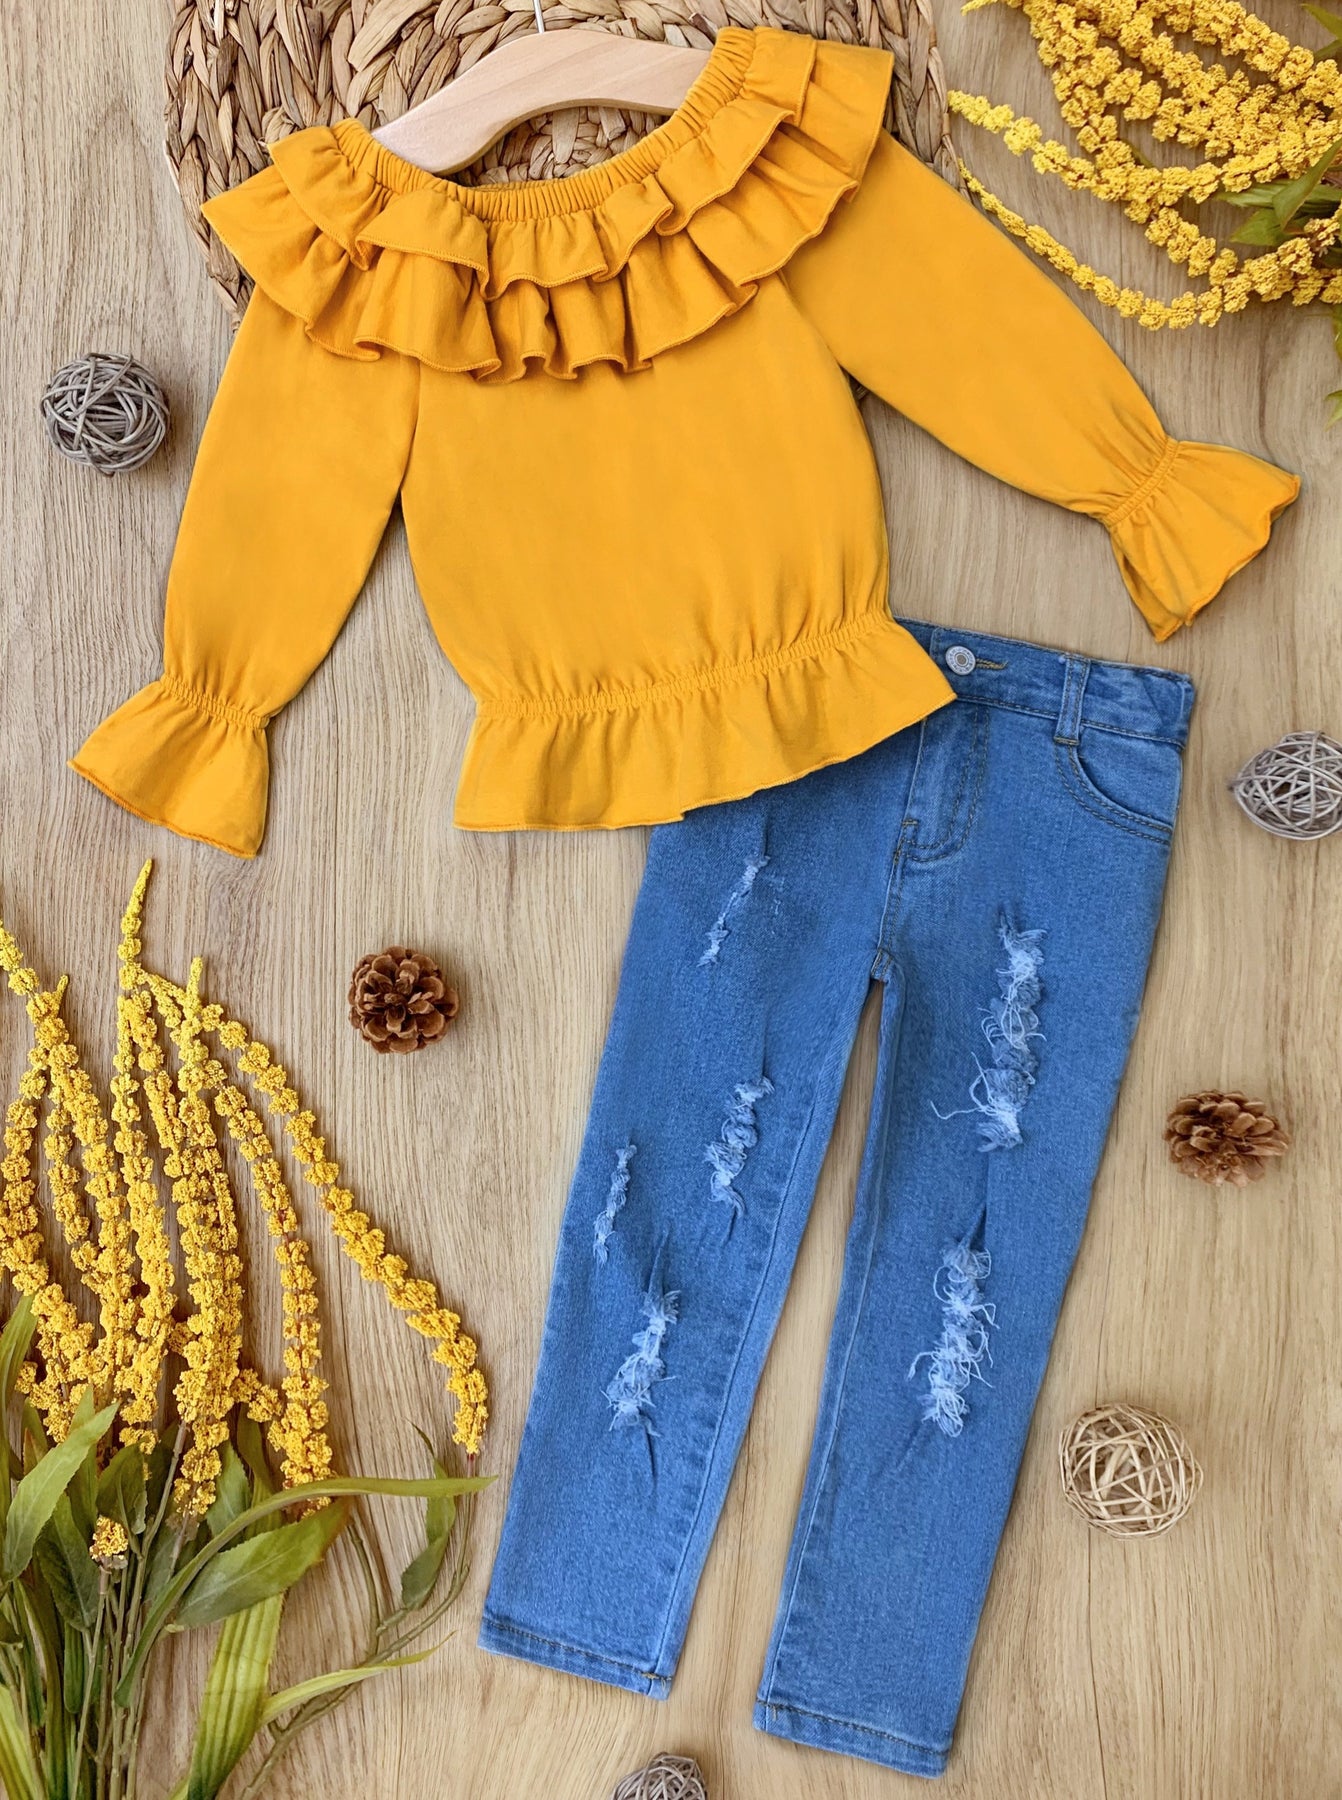 Fall Outfits | Ruffle Top & Distressed Jeans Set | Cute Girls Set – Mia ...